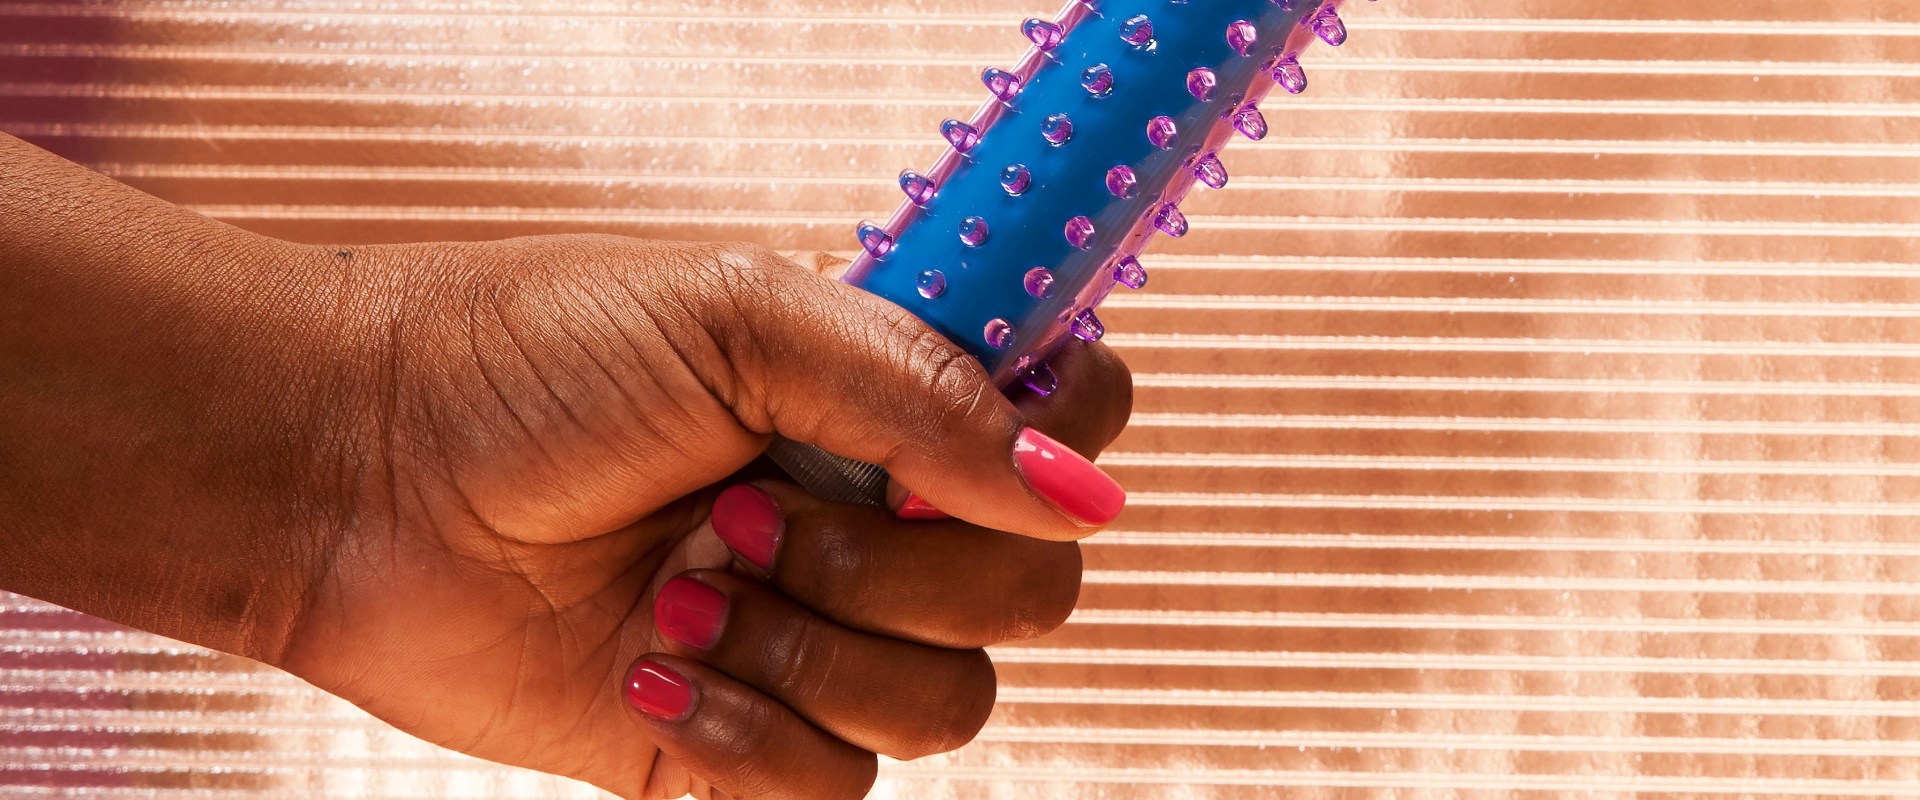 The Difference Between Silicone and Plastic Adult Toys